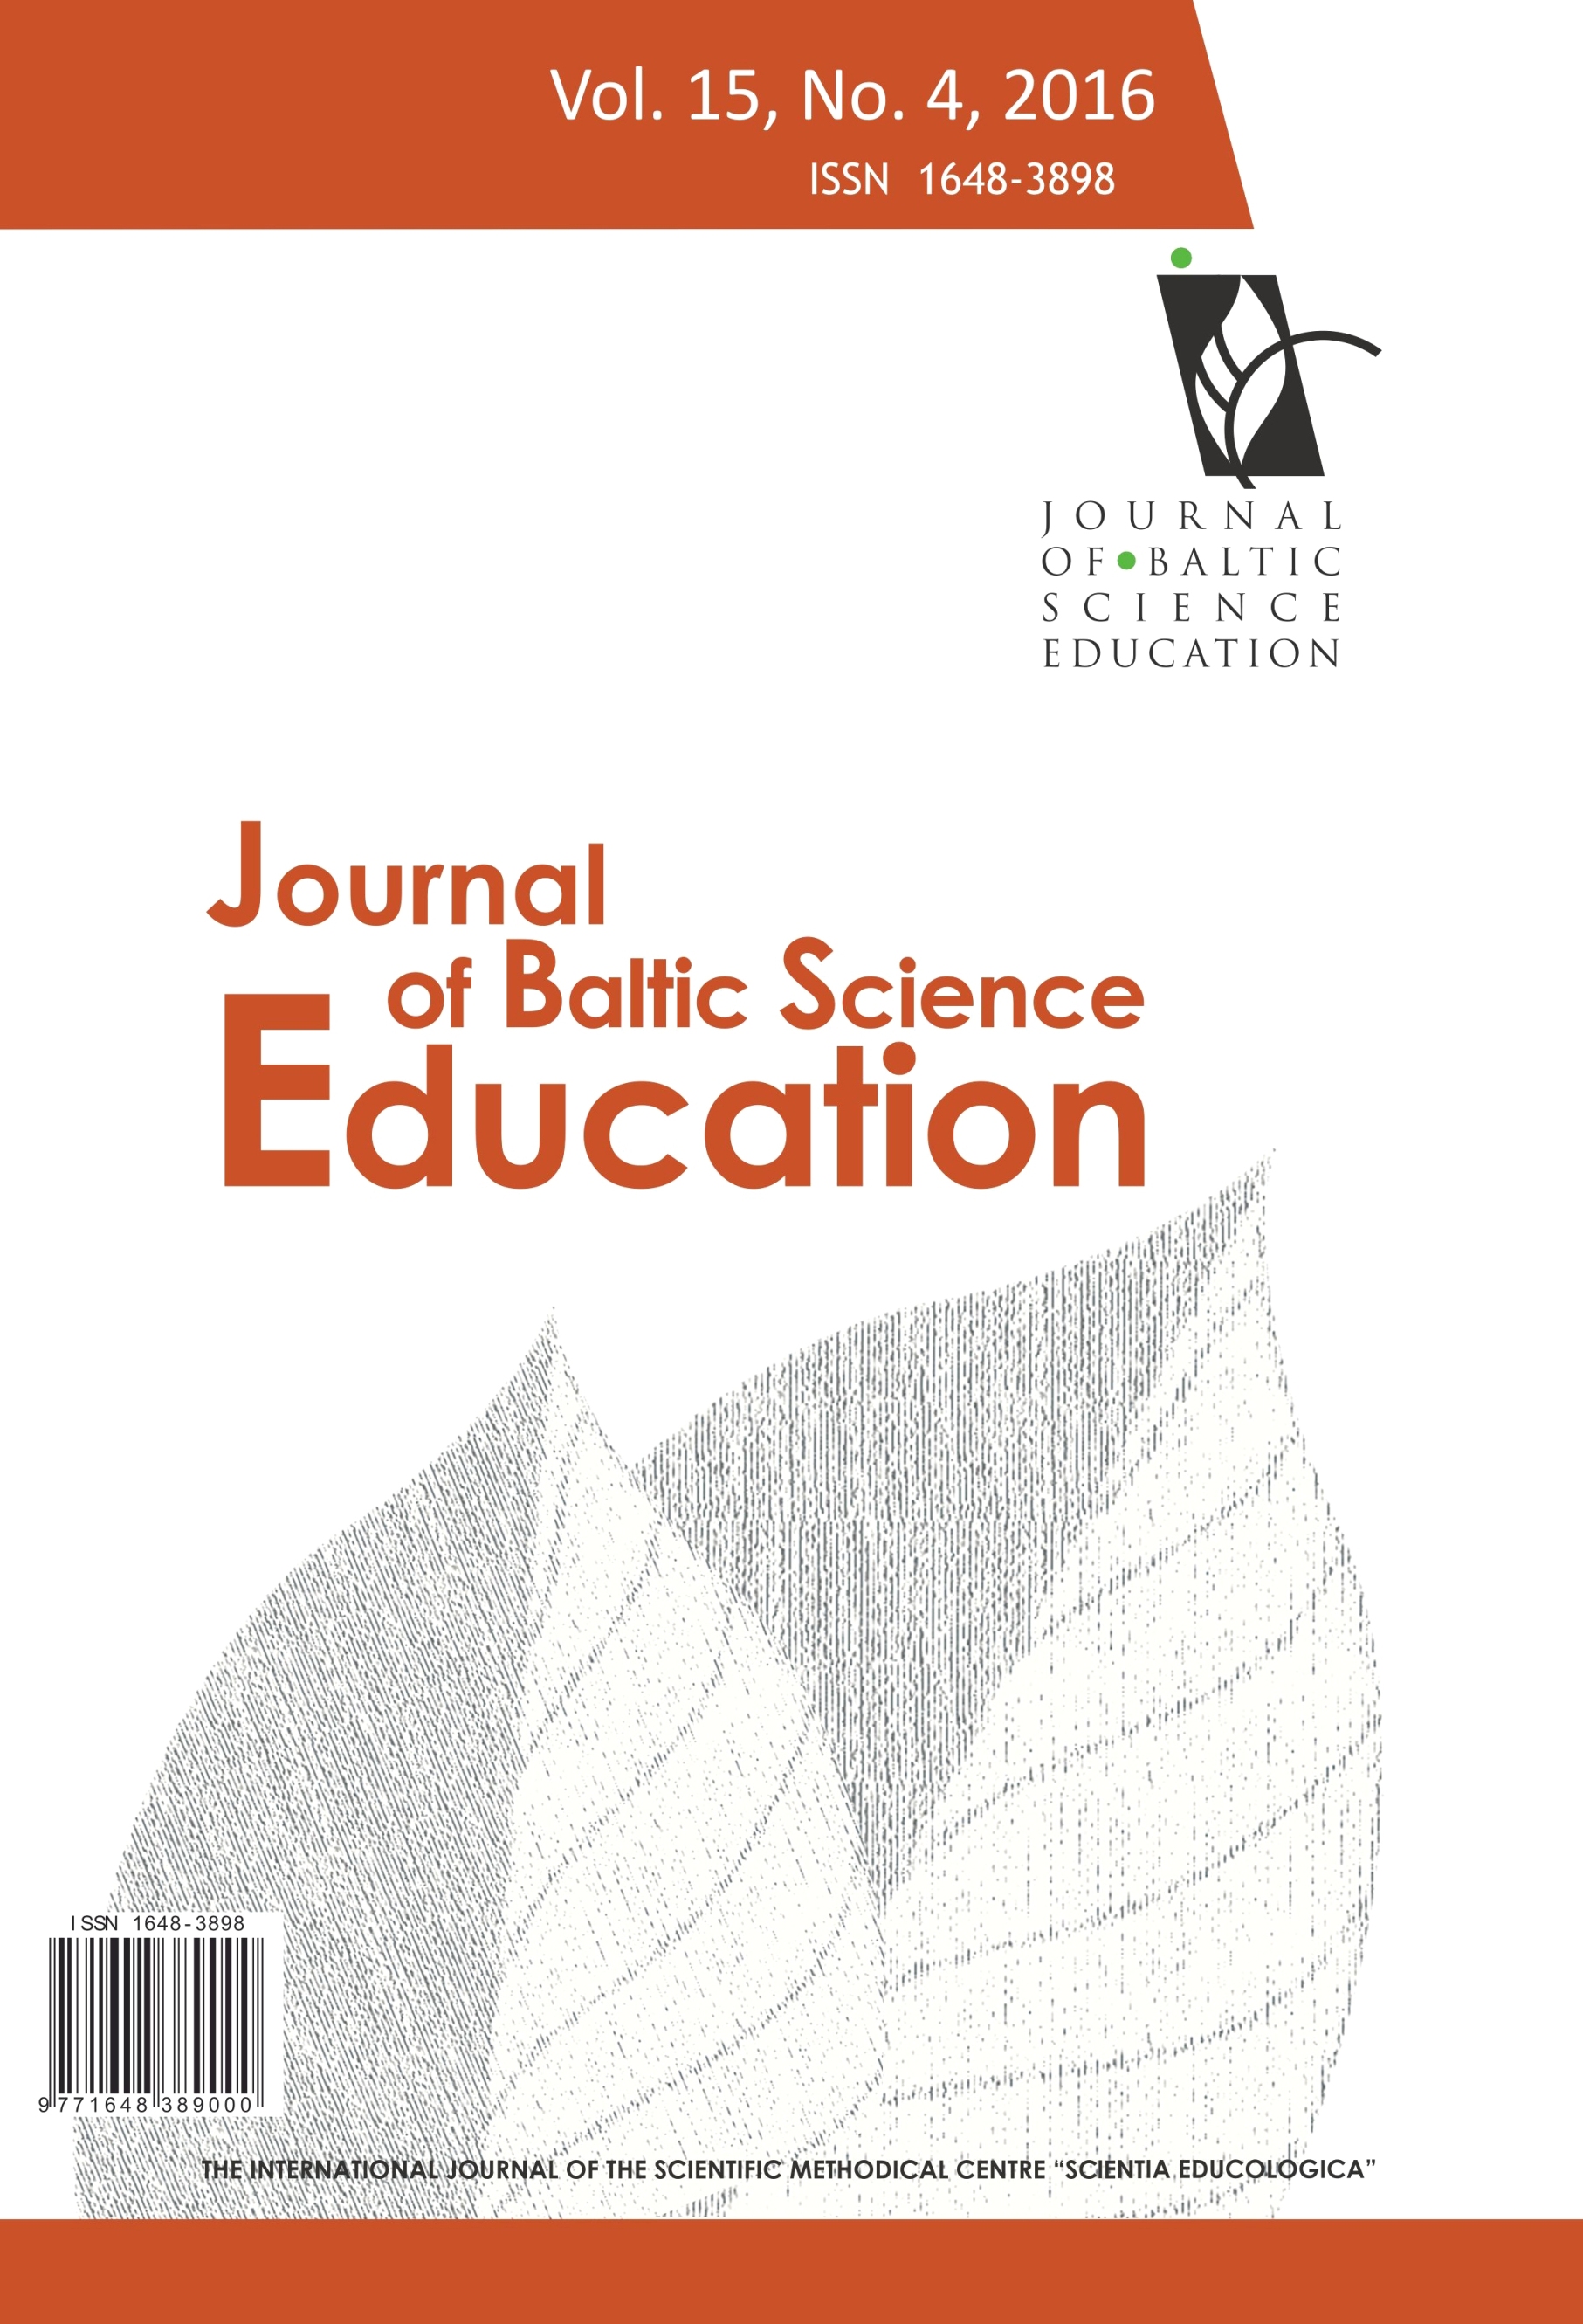 KOREAN SCIENCE TEACHERS’ PERCEPTIONS AND ACTUAL USAGE OF EDUCATIONAL THEORIES/TEACHING STRATEGIES IN THEIR TEACHING Cover Image